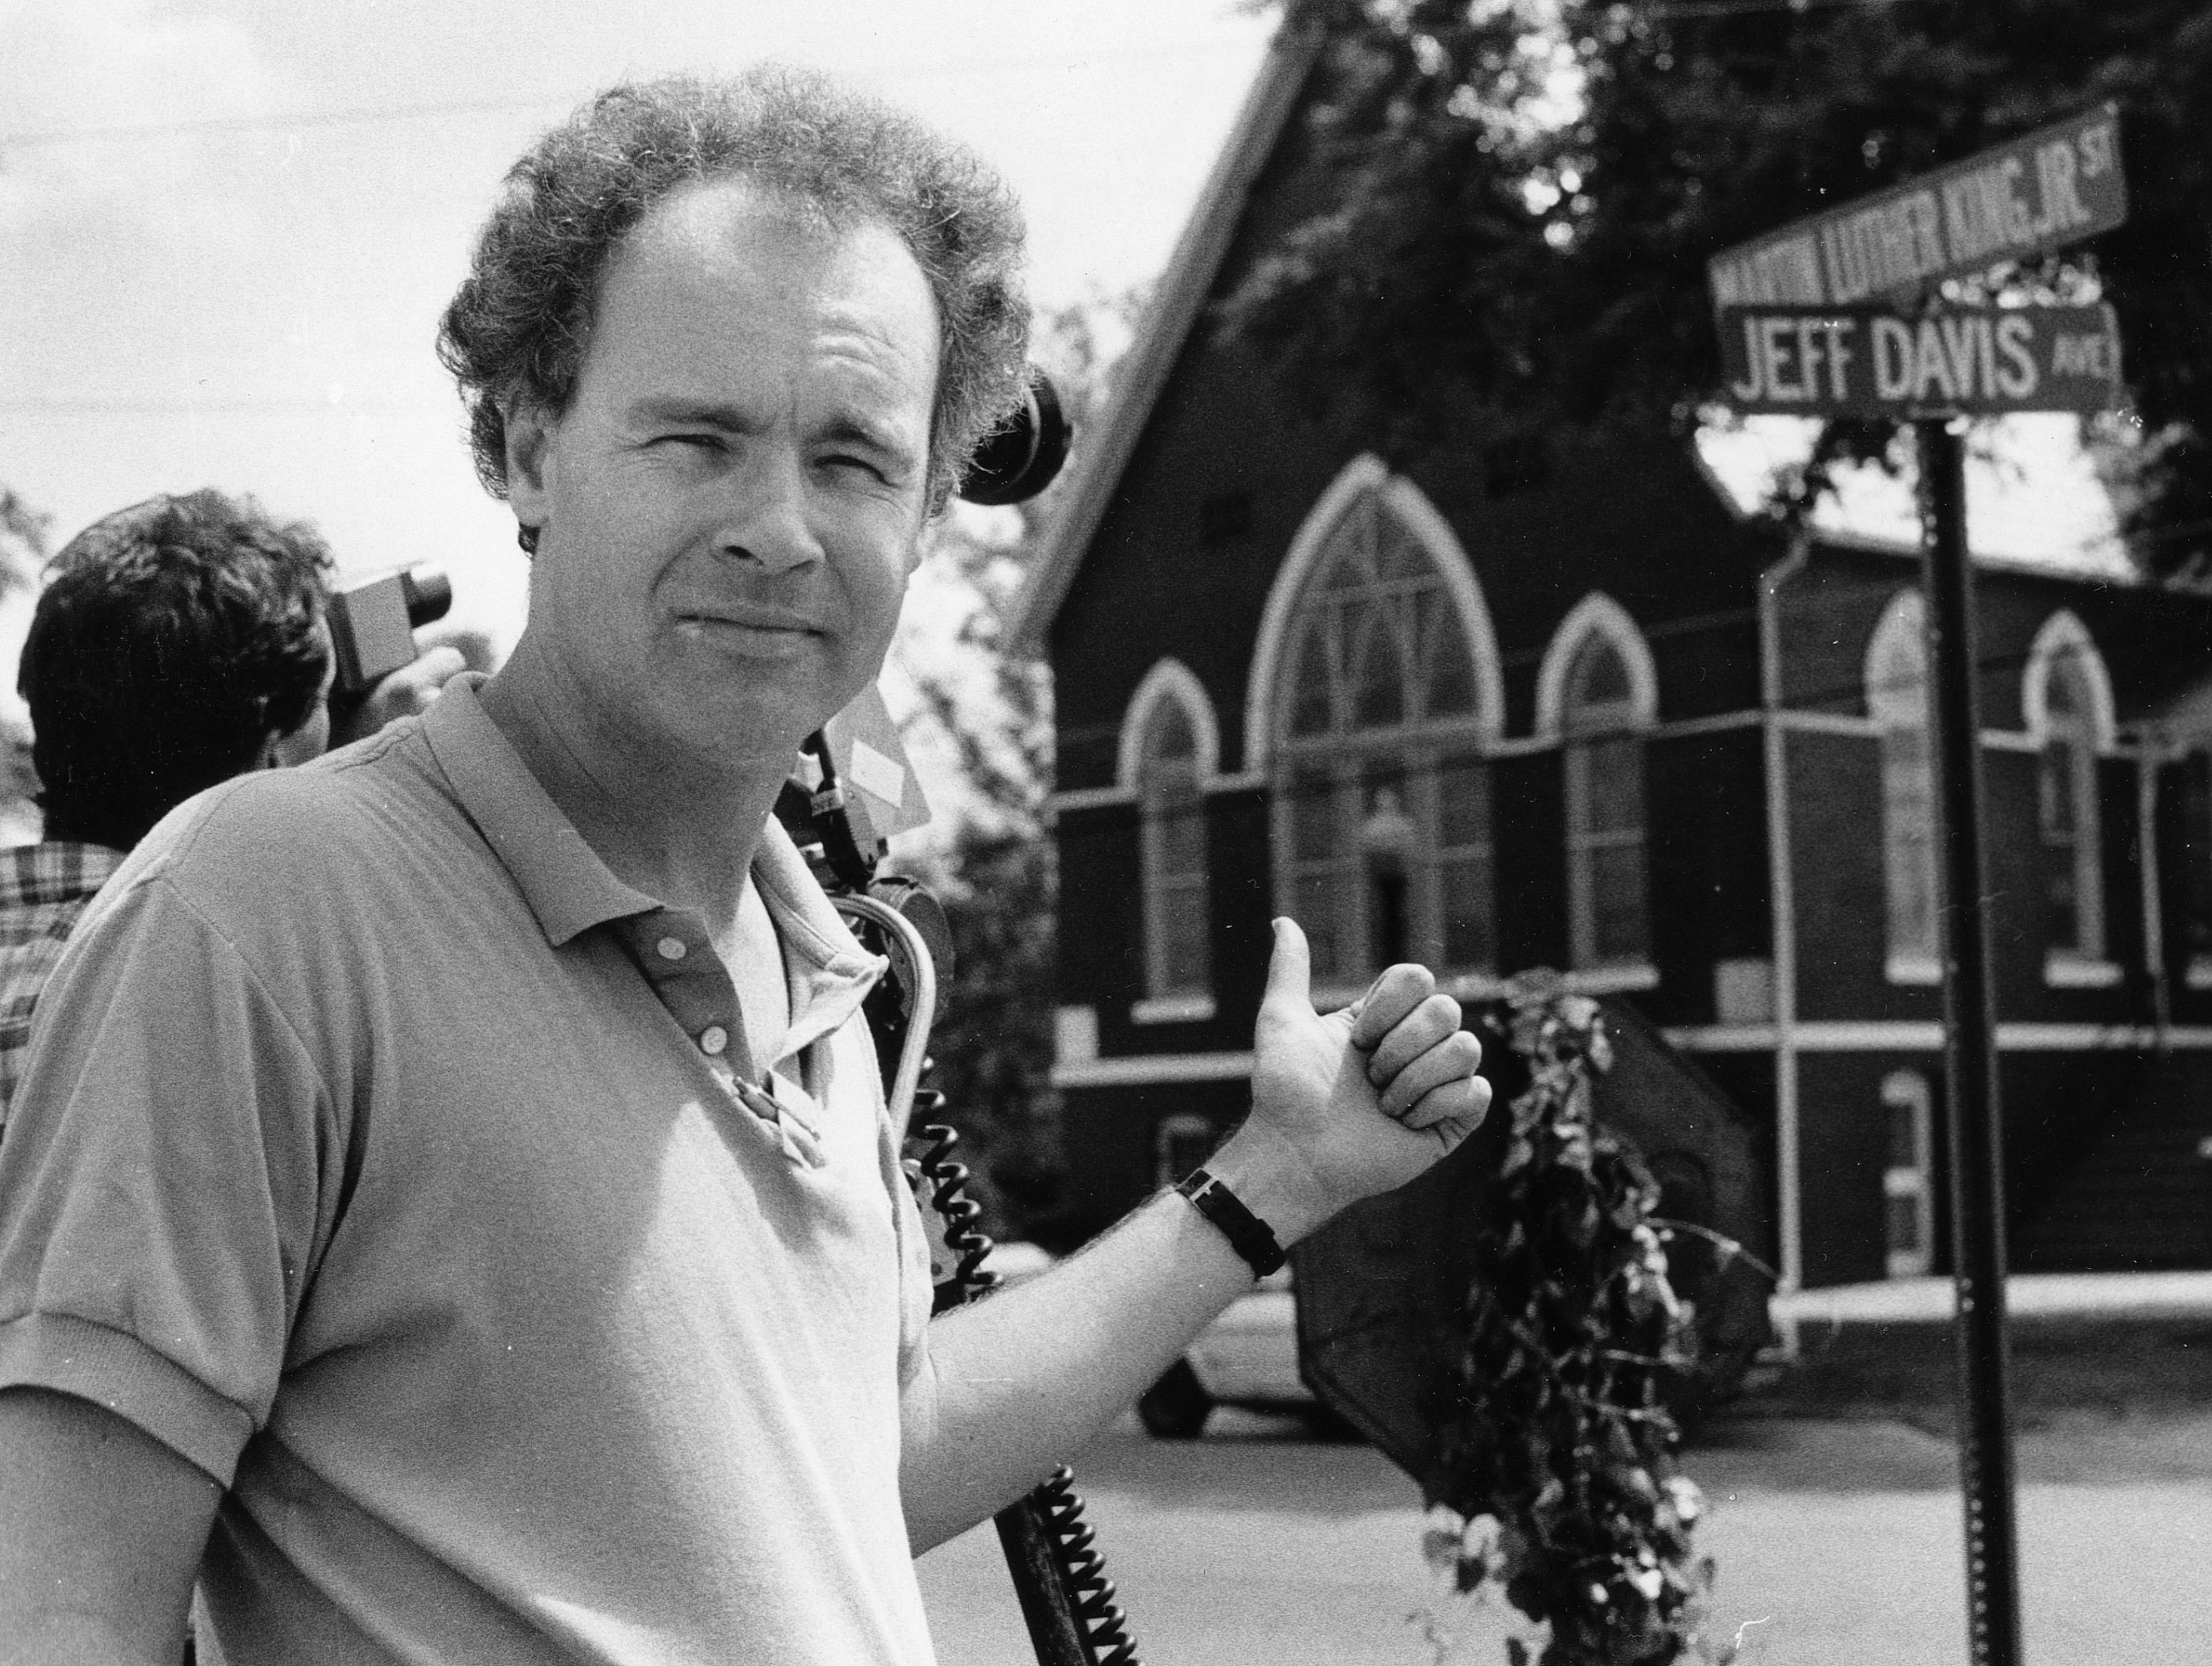 Director Ross Spears in Selma, AL shooting for the film LONG SHADOWS in 1986.